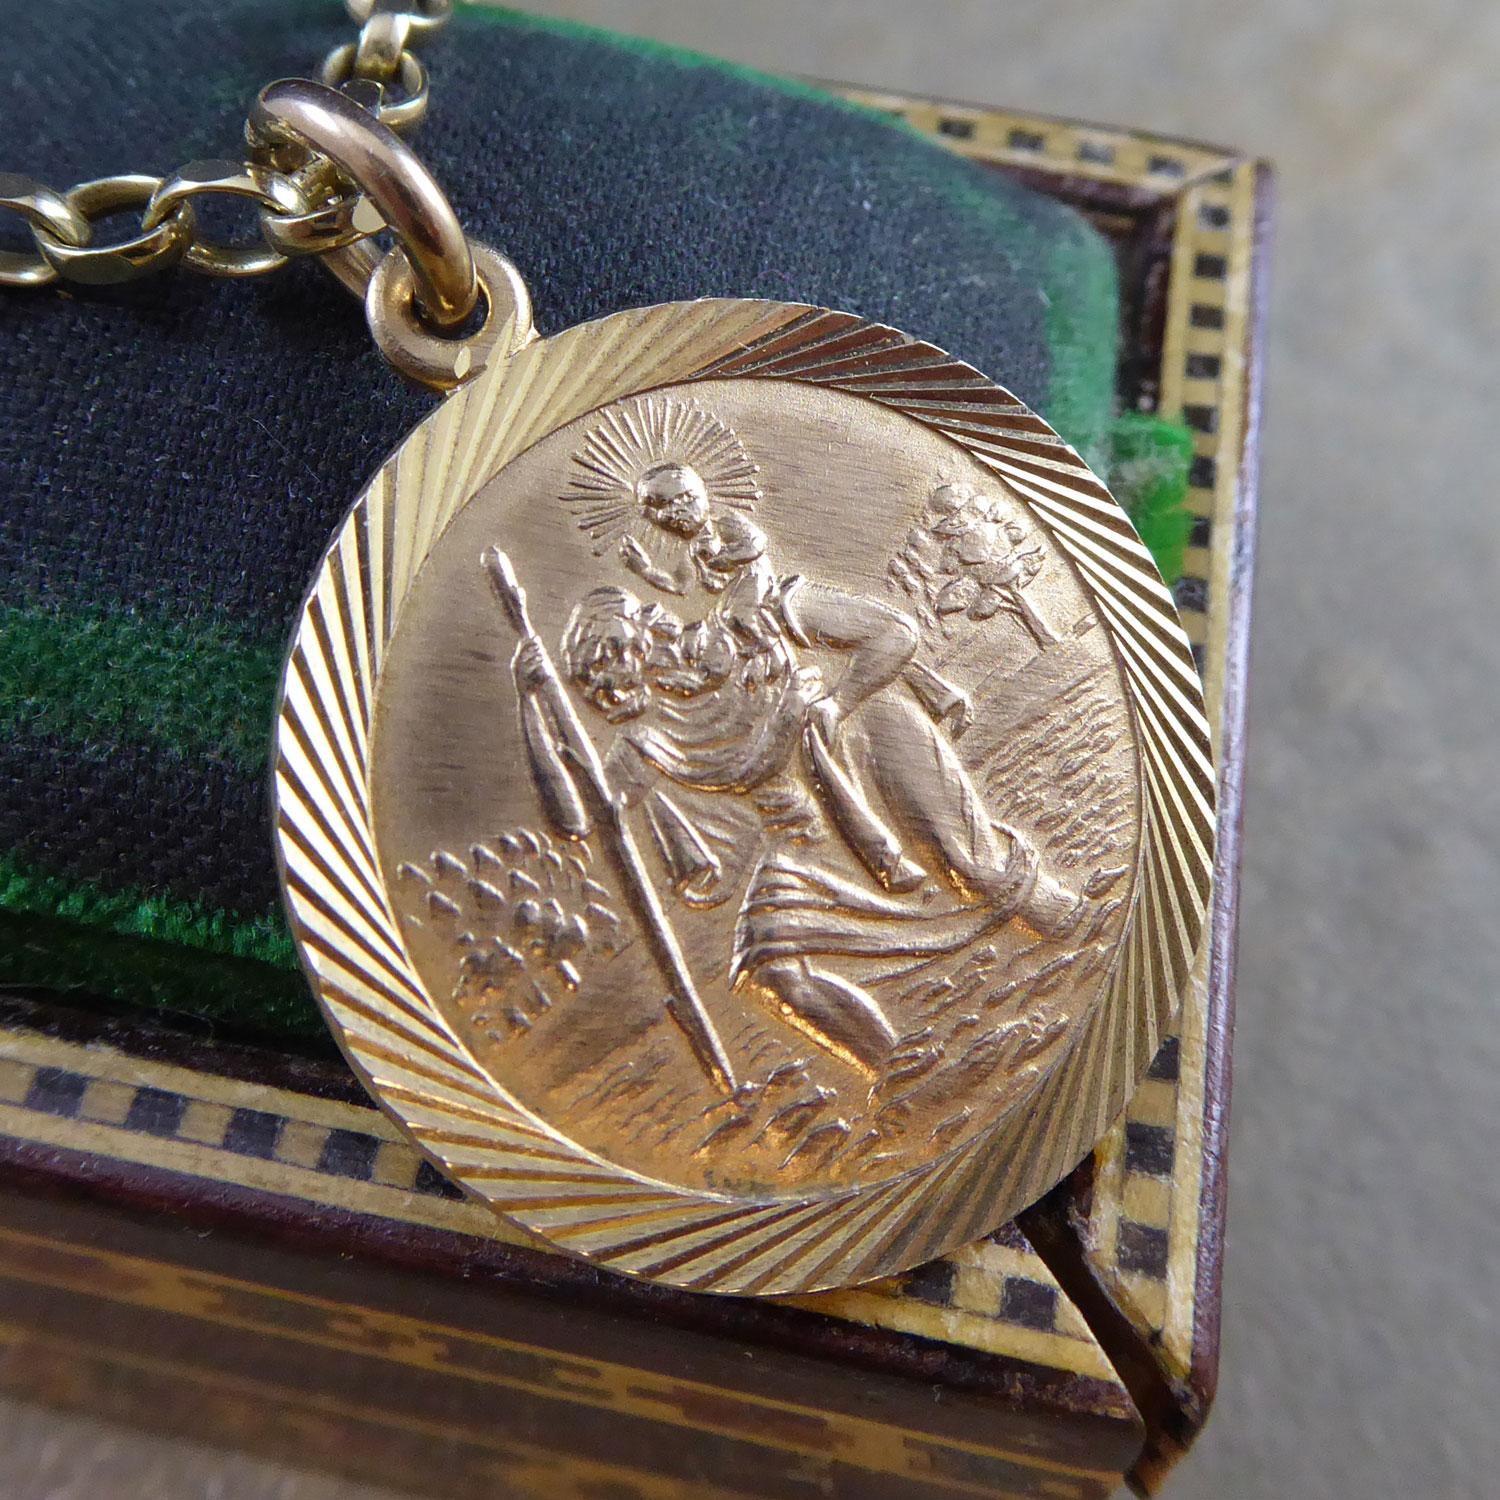 The enduring symbol of St. Christopher, patron saint of travellers.  This St. Christopher medallian has been crafted from 9ct yellow gold in 1977.  As expected, it depicts the well-known figure carrying the Christ Child across a river.  The